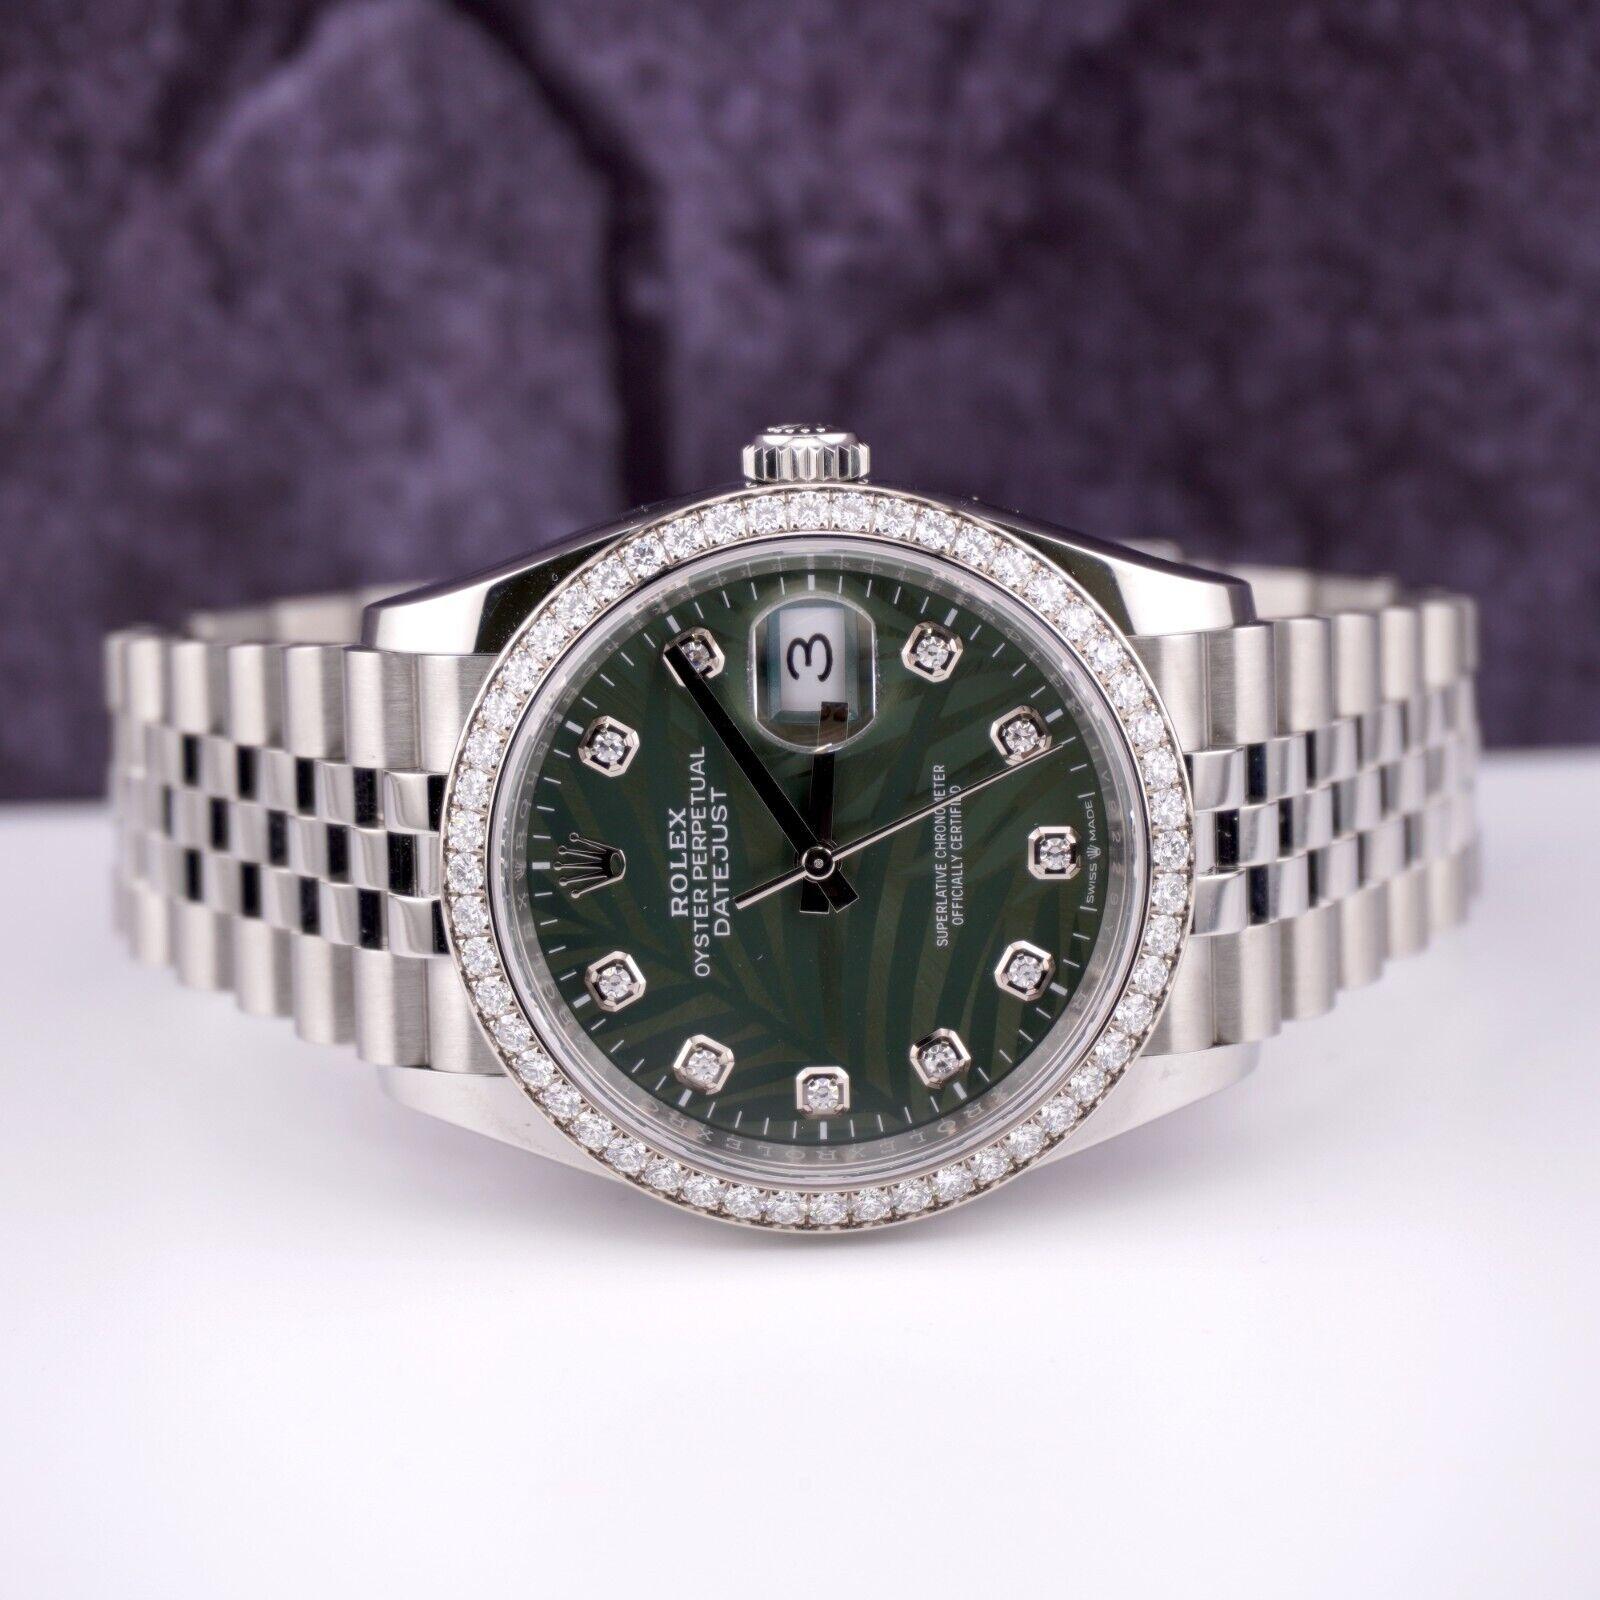 Rolex Datejust 36mm Watch

Pre-owned w/ Original Box & Card
100% Authentic Authenticity Card
Condition - (Excellent Condition) - See Pics
Watch Reference - 126284RBR
Model - Datejust
Dial Color - Palm Green
Material - Stainless Steel
Watch Will Fit